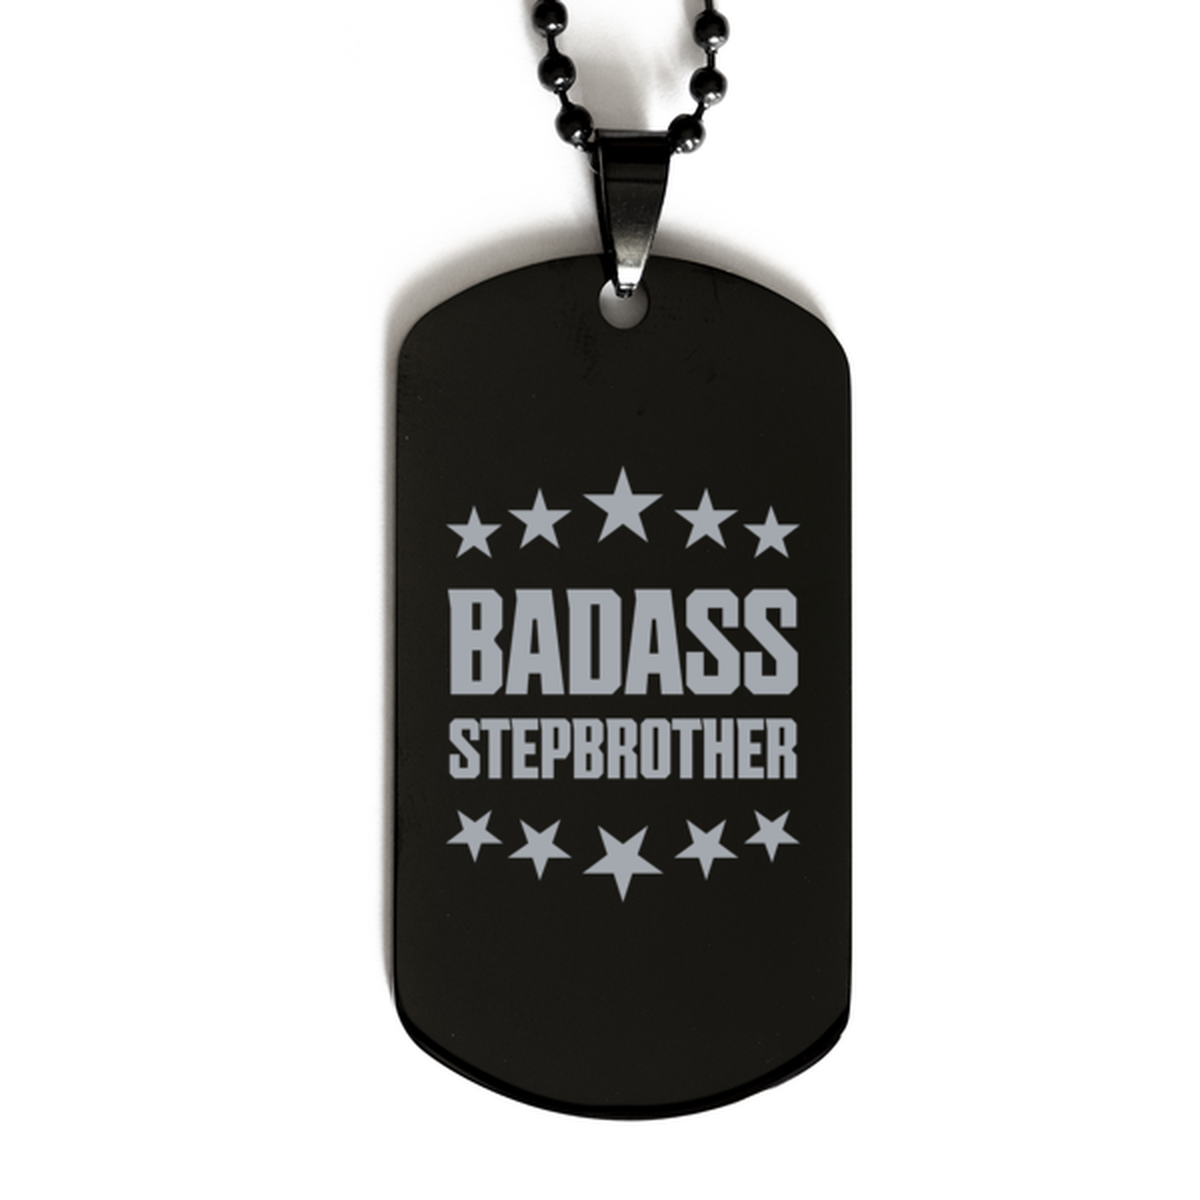 Stepbrother Black Dog Tag, Badass Stepbrother, Funny Family Gifts  Necklace For Stepbrother From Brother Sister